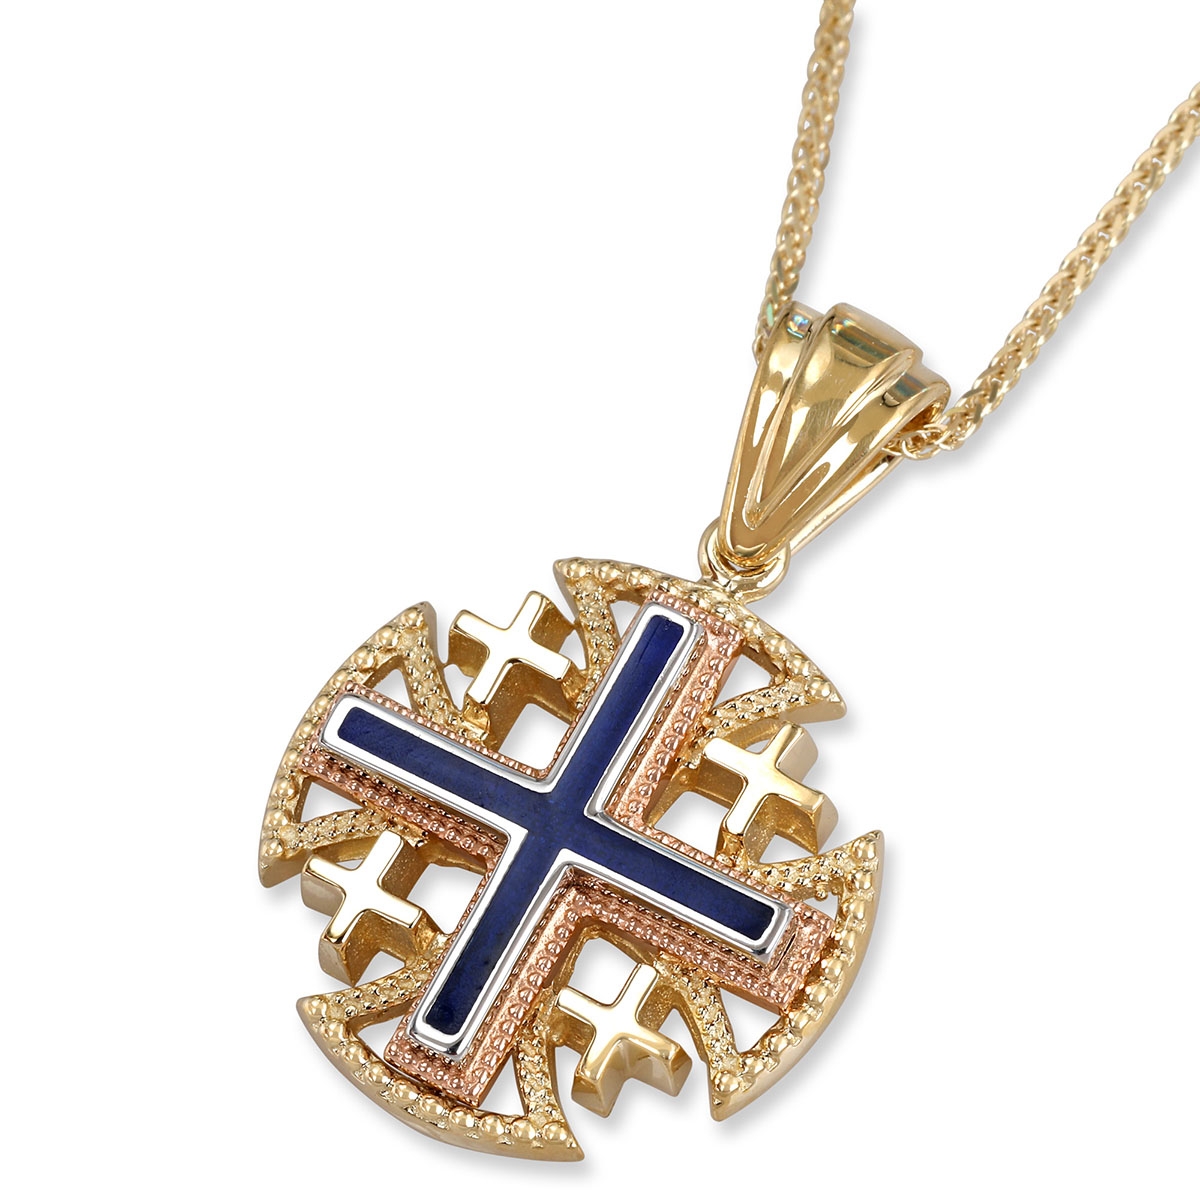 Anbinder Tricolor 14K Yellow, White, and Rose Gold Splayed Jerusalem Cross Pendant with Milgrain Design and Blue Enamel Inlay - 1